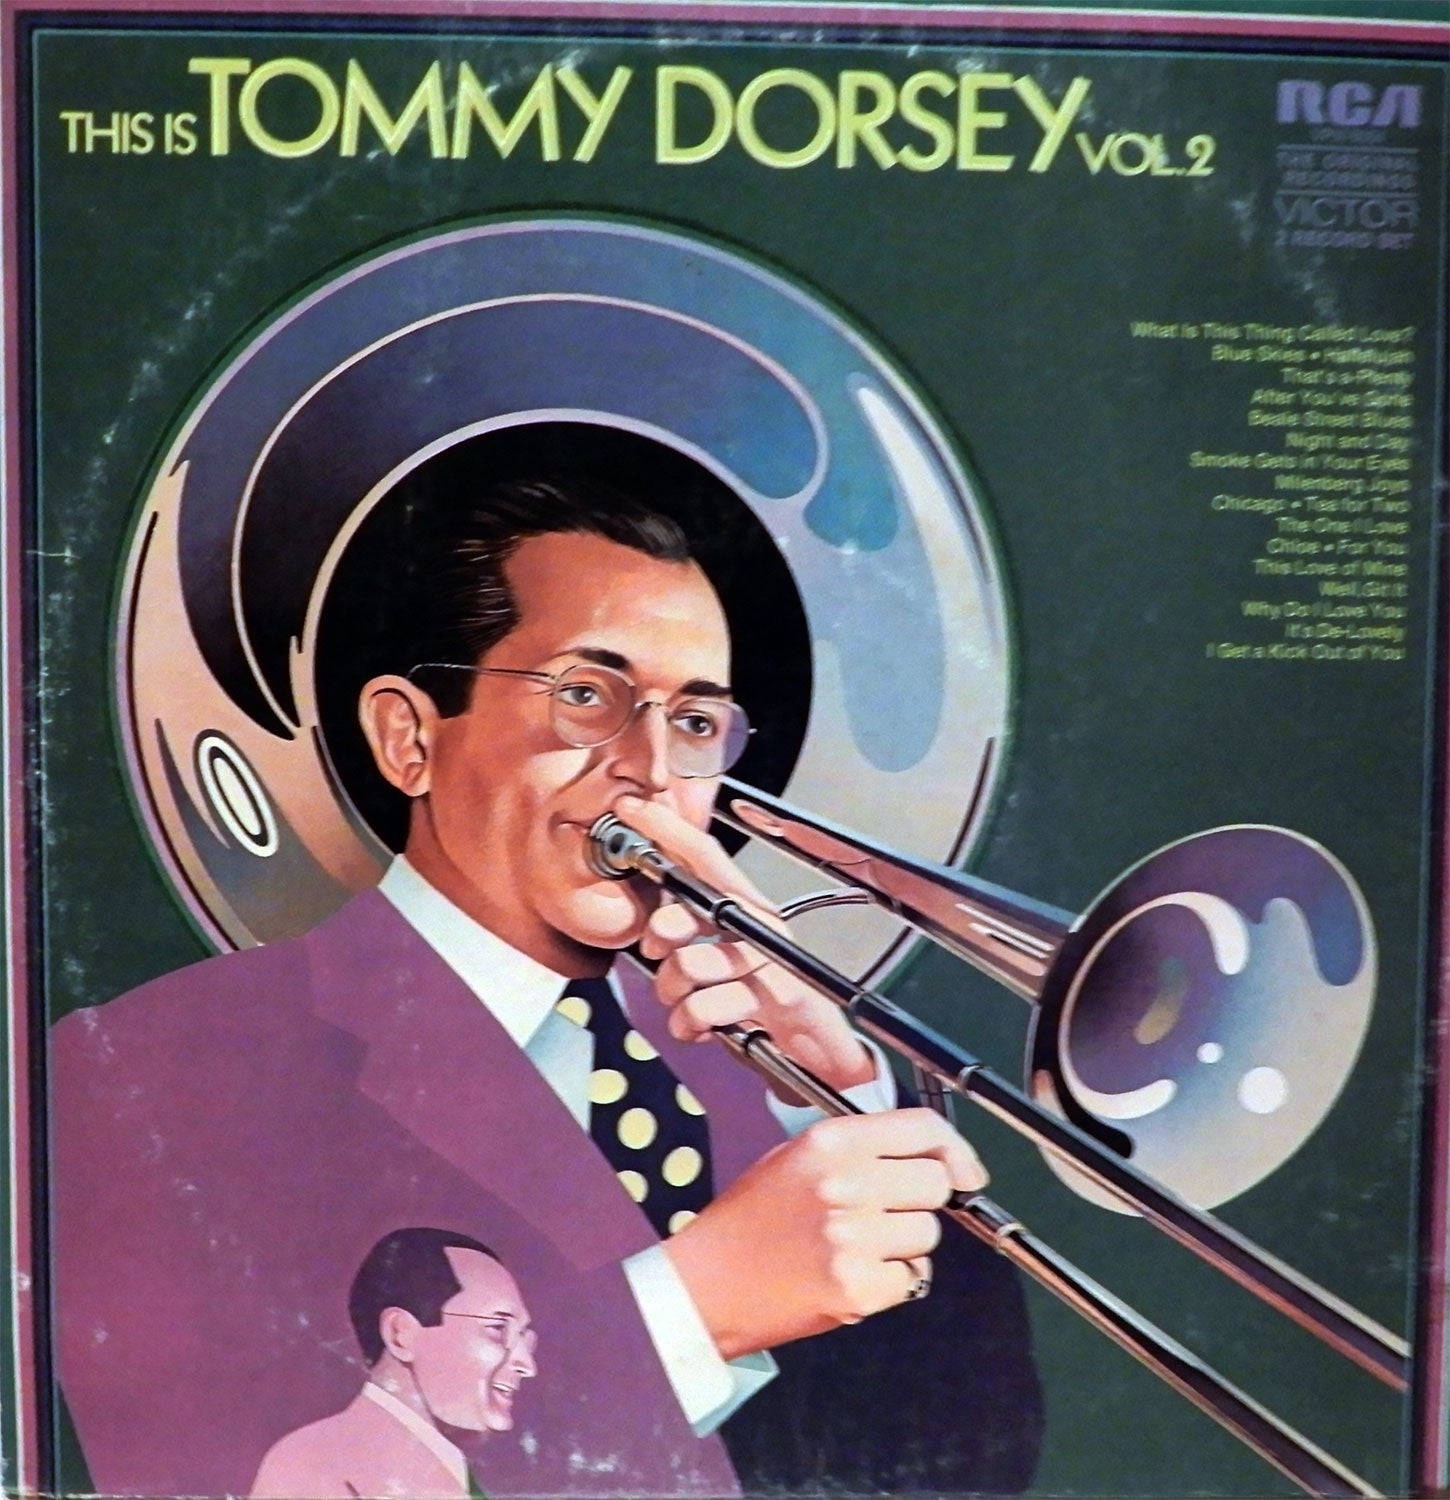 This Is Tommy Dorsey Volume 2 Album Cover Wallpaper